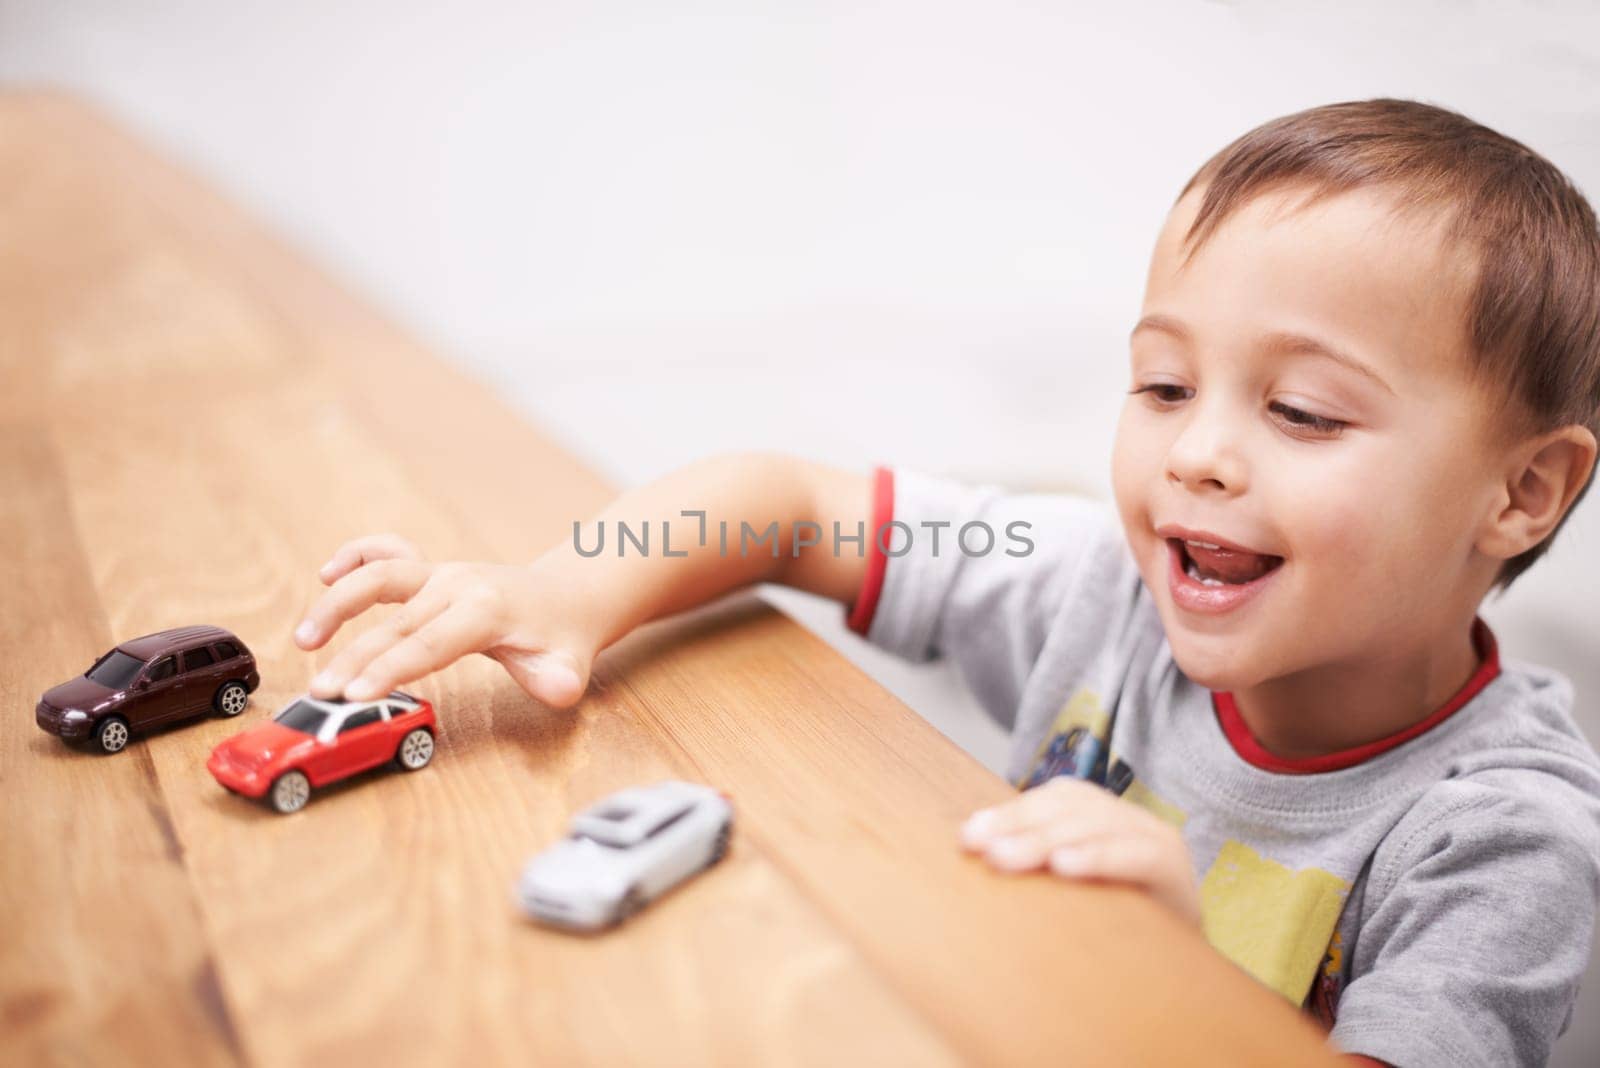 Cars, toys and boy kid by table playing for learning, development and fun at modern home. Cute, sweet and young child enjoying a game with plastic vehicles by wood for childhood hobby at house